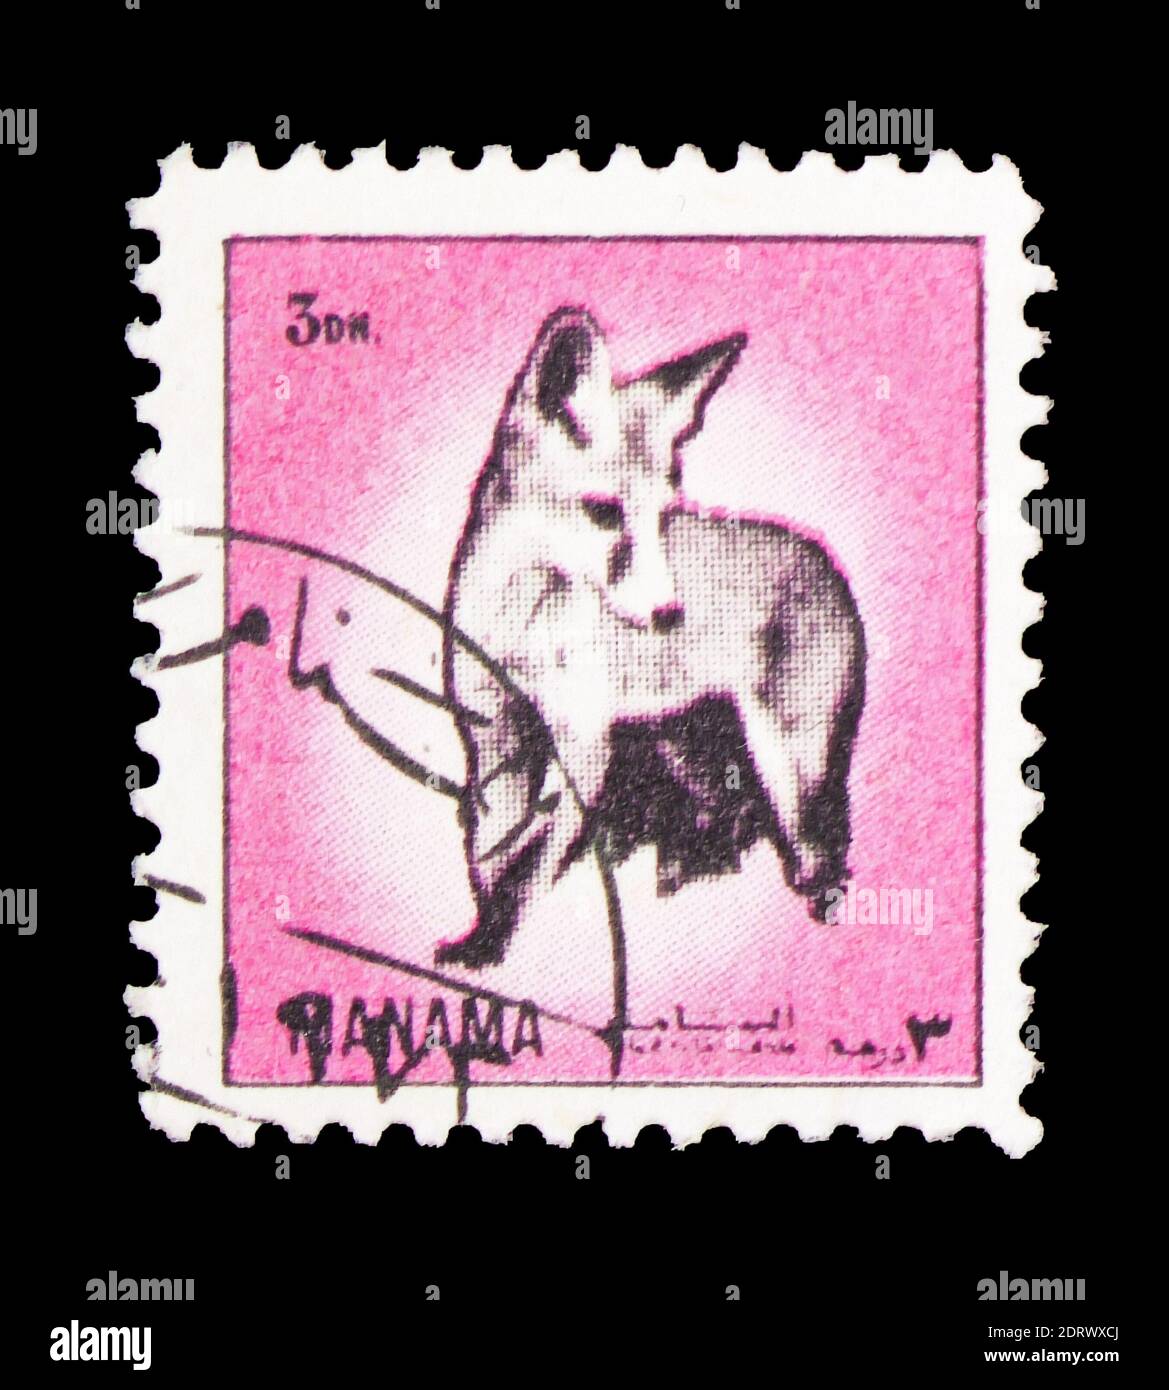 MOSCOW, RUSSIA - FEBRUARY 10, 2019: A stamp printed in Manama (Bahrain) shows Jackal (Canis sp.), Mammals serie, circa 1972 Stock Photo